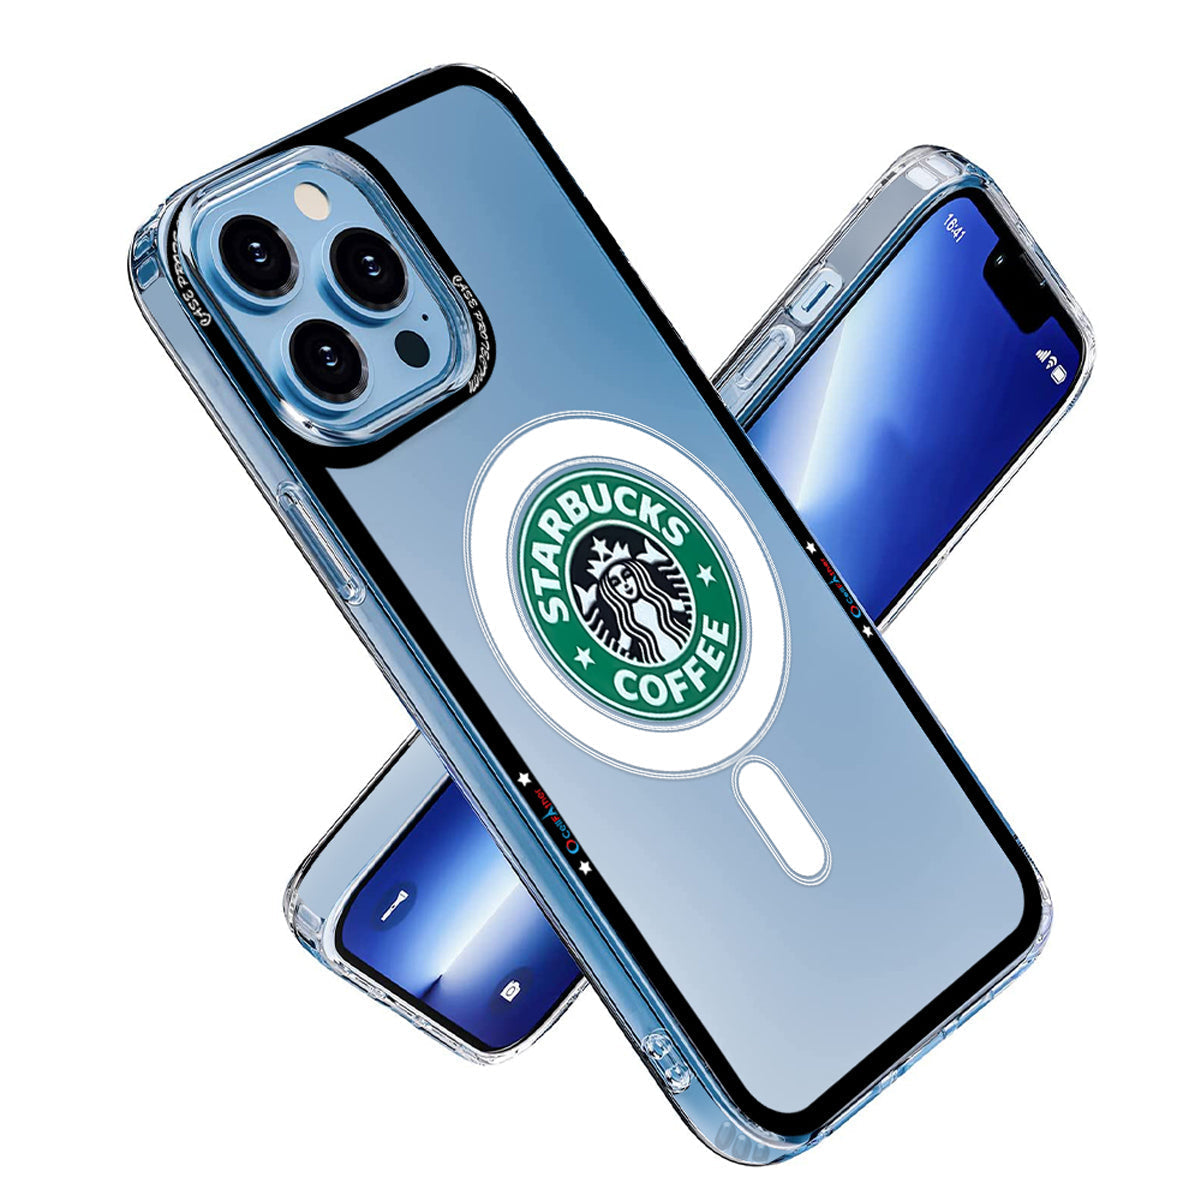 IPhone 11 Case Starbuck Print Design, Mobile Phone Case for IPhone, Latest IPhone Covers